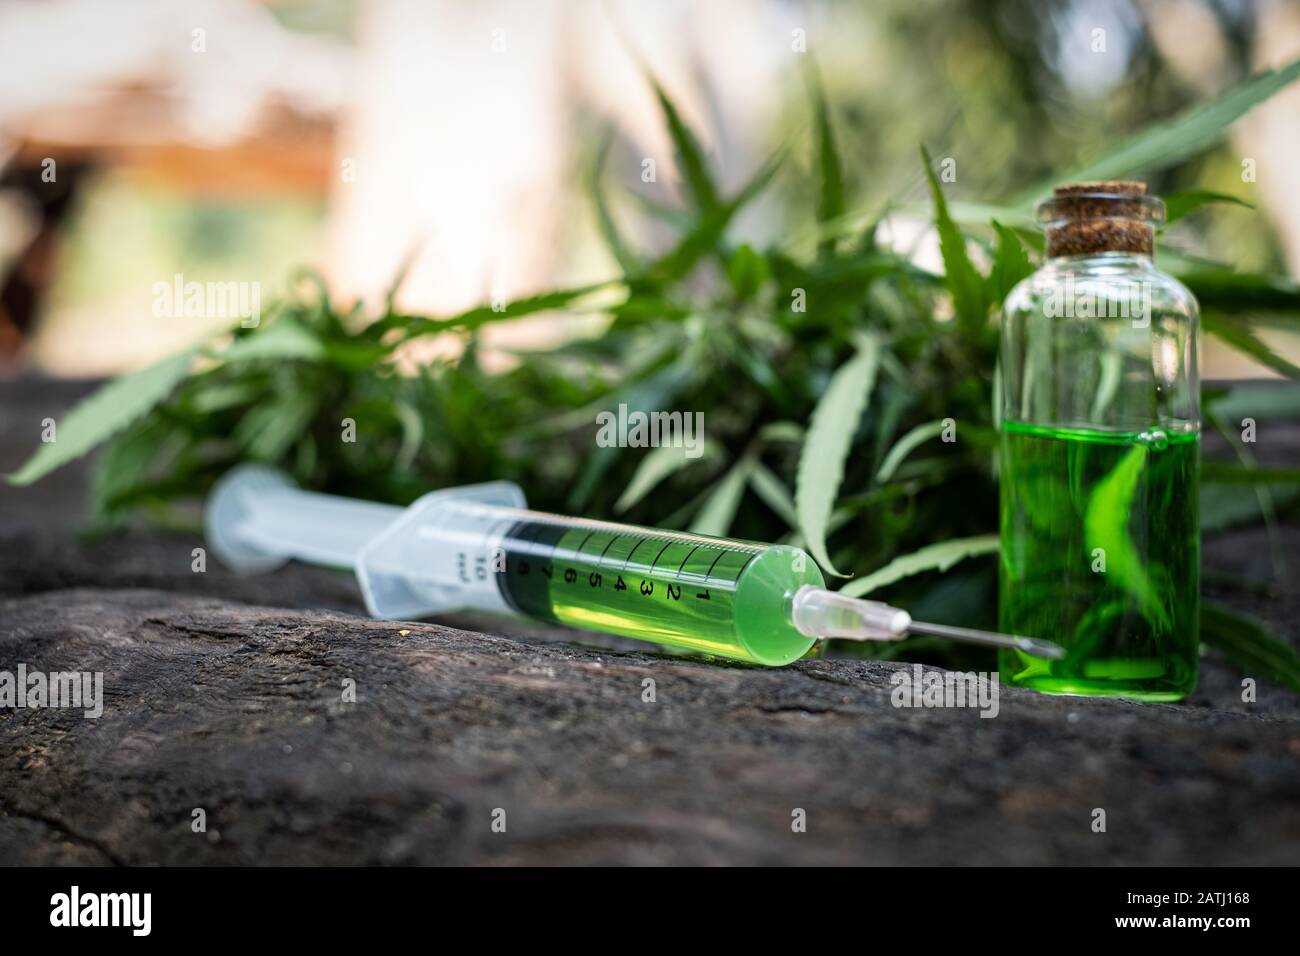 Syringe there is medicine inside on table wood at cannabis leaf background Stock Photo